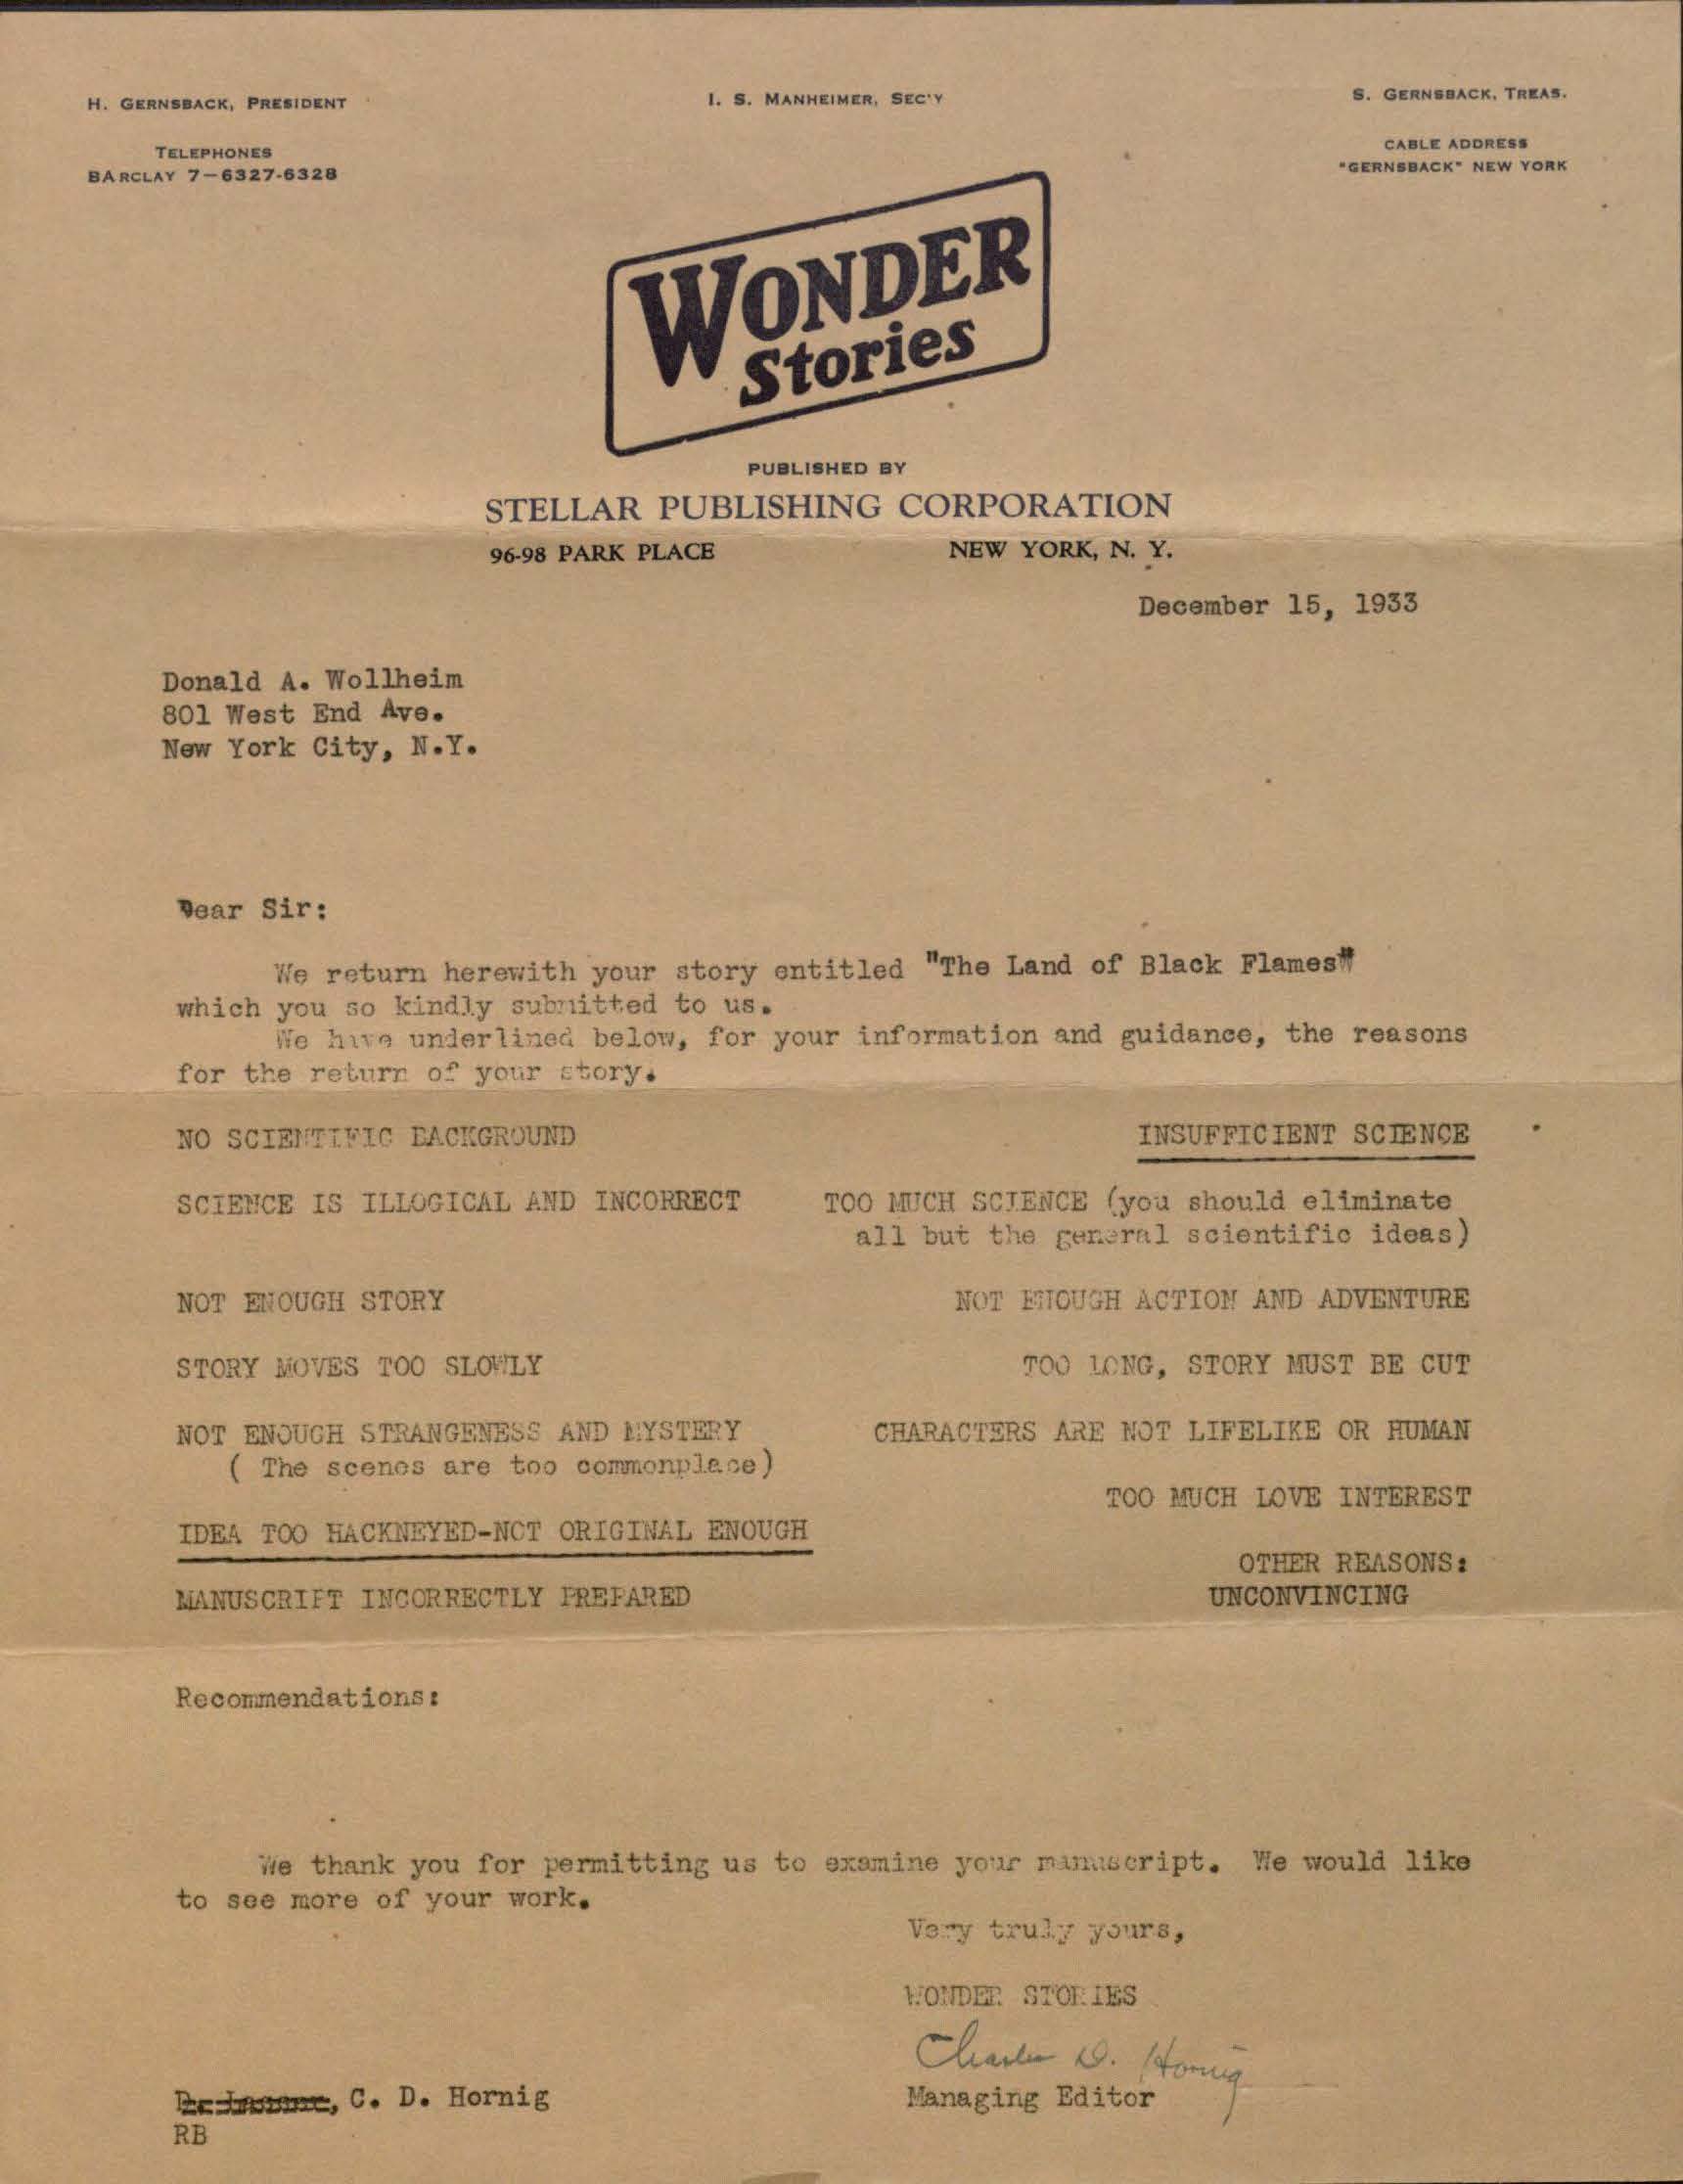 Image of Wonder Stories' form rejection letter for Donald A. Wollheim's "The Land of Black Flames," December 15, 1933.